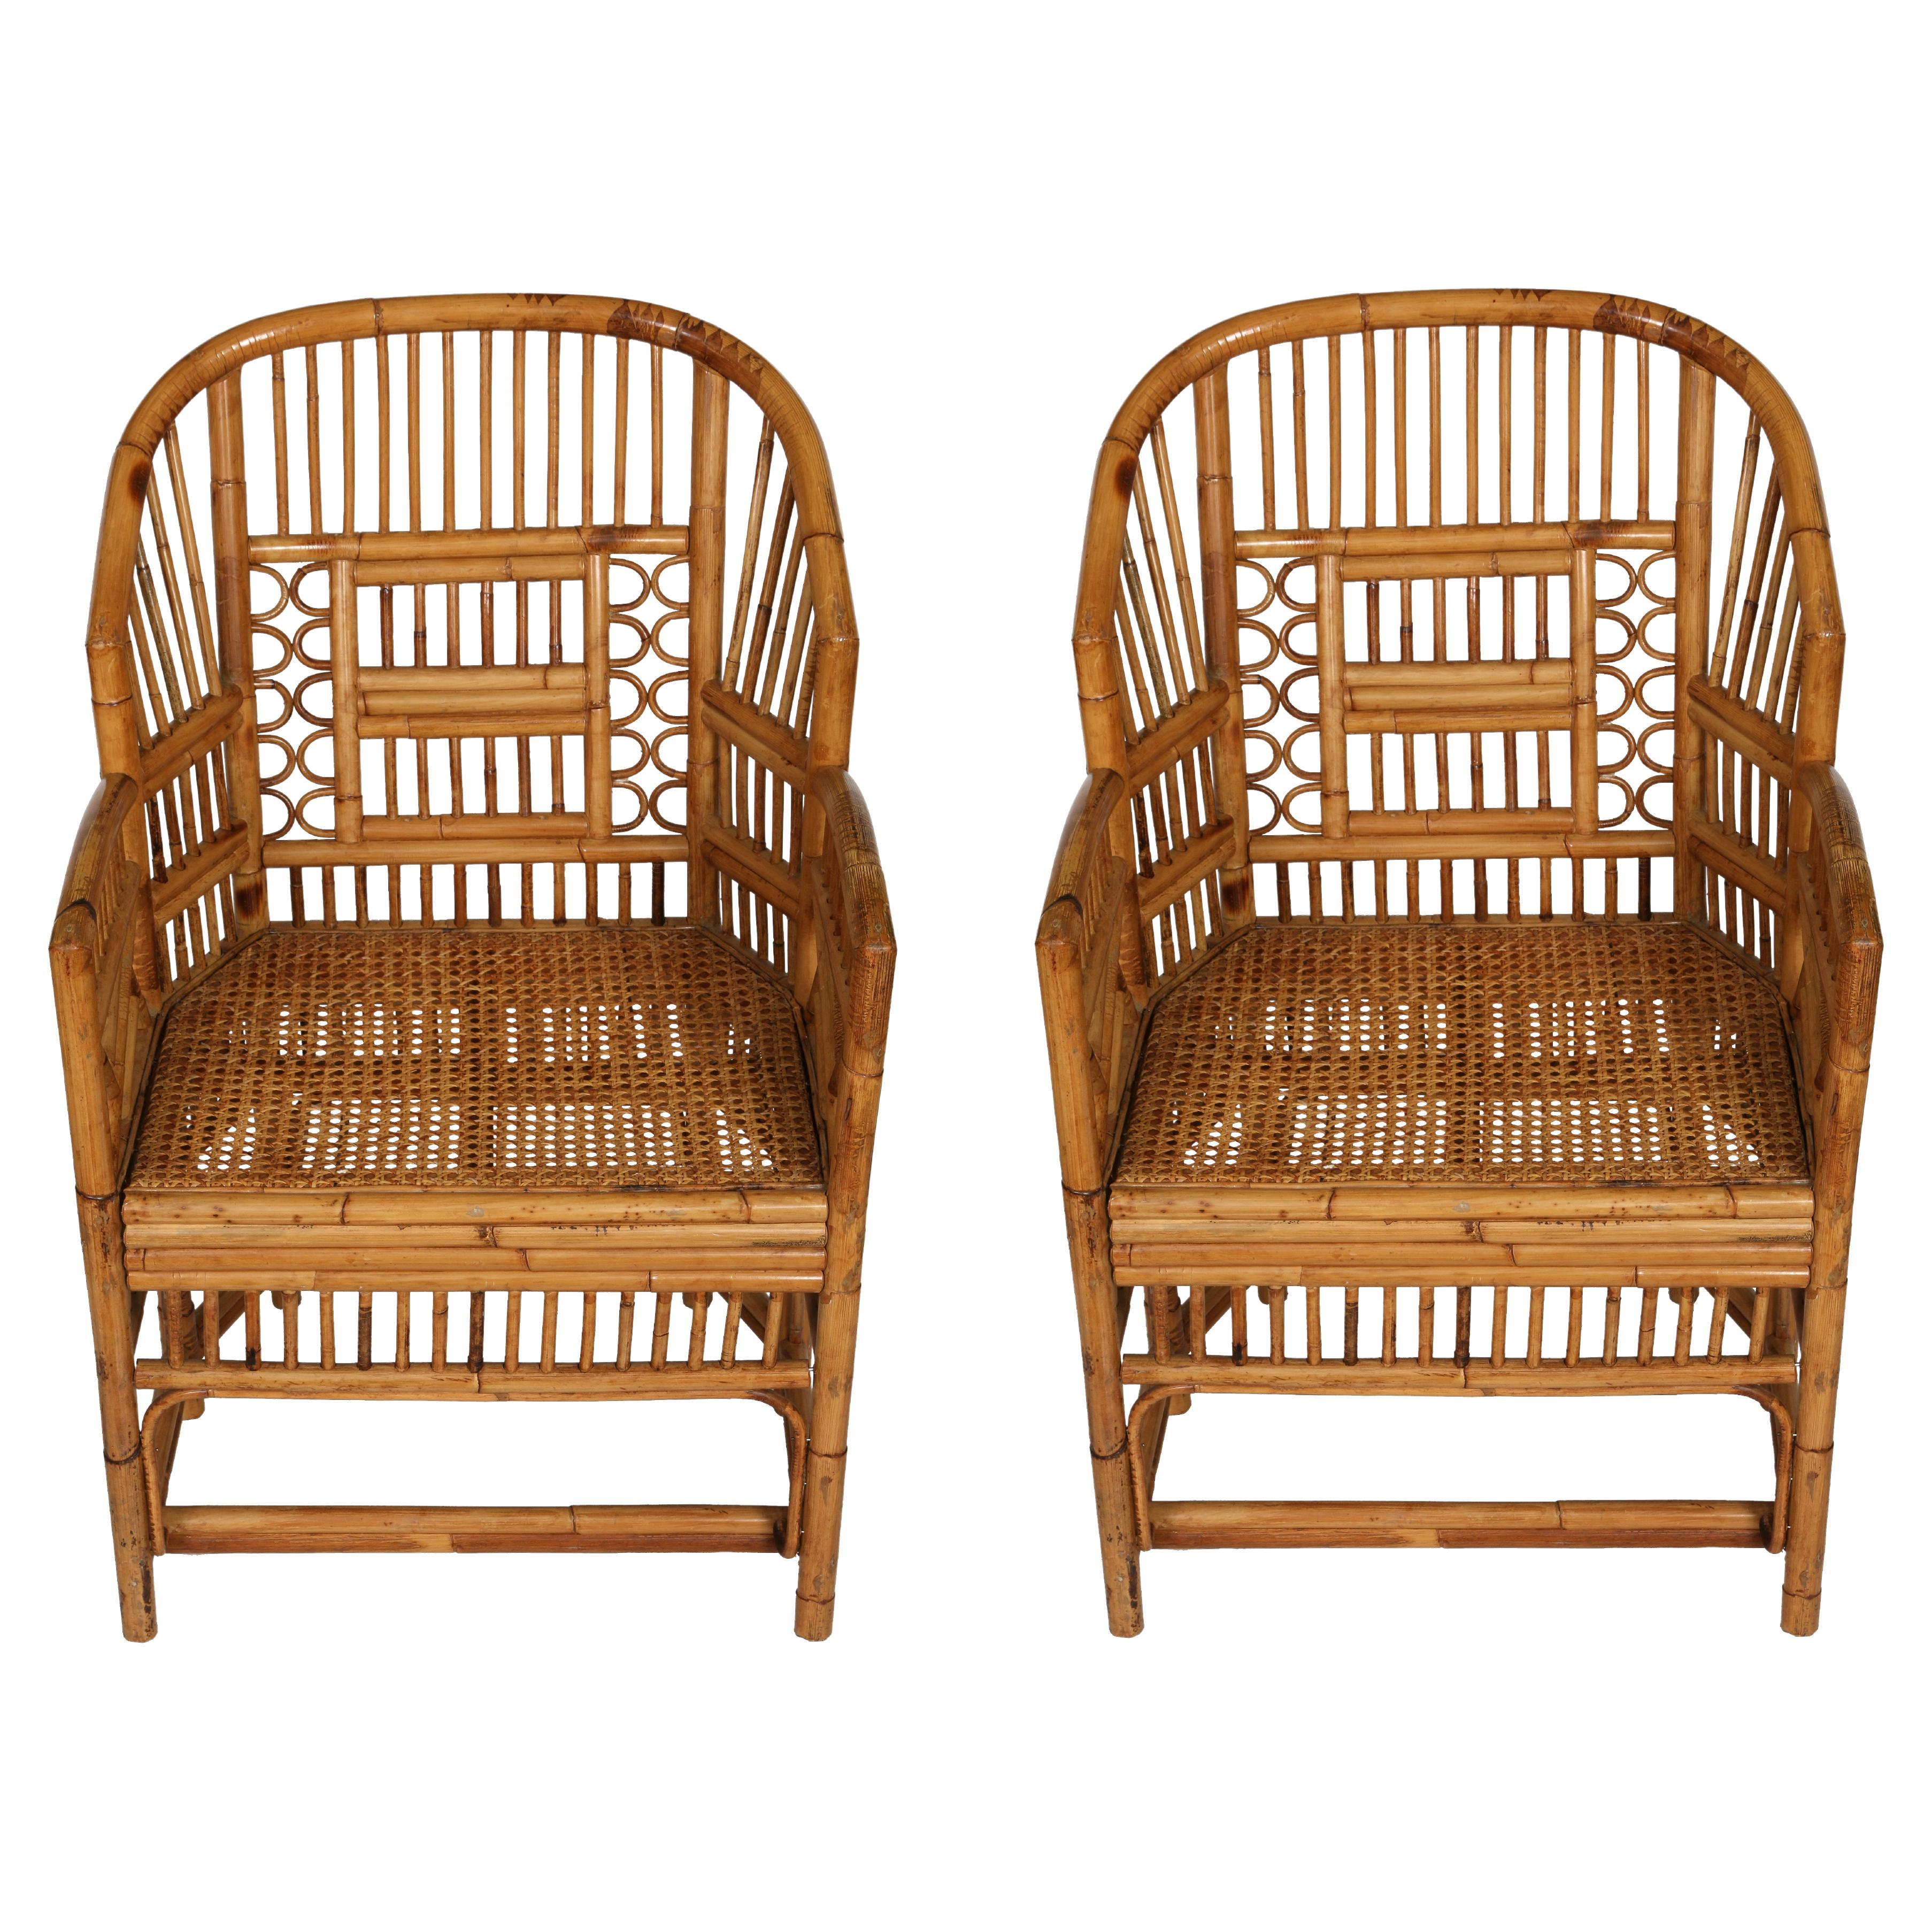 Pair of Asian Style Faux Bamboo Chairs